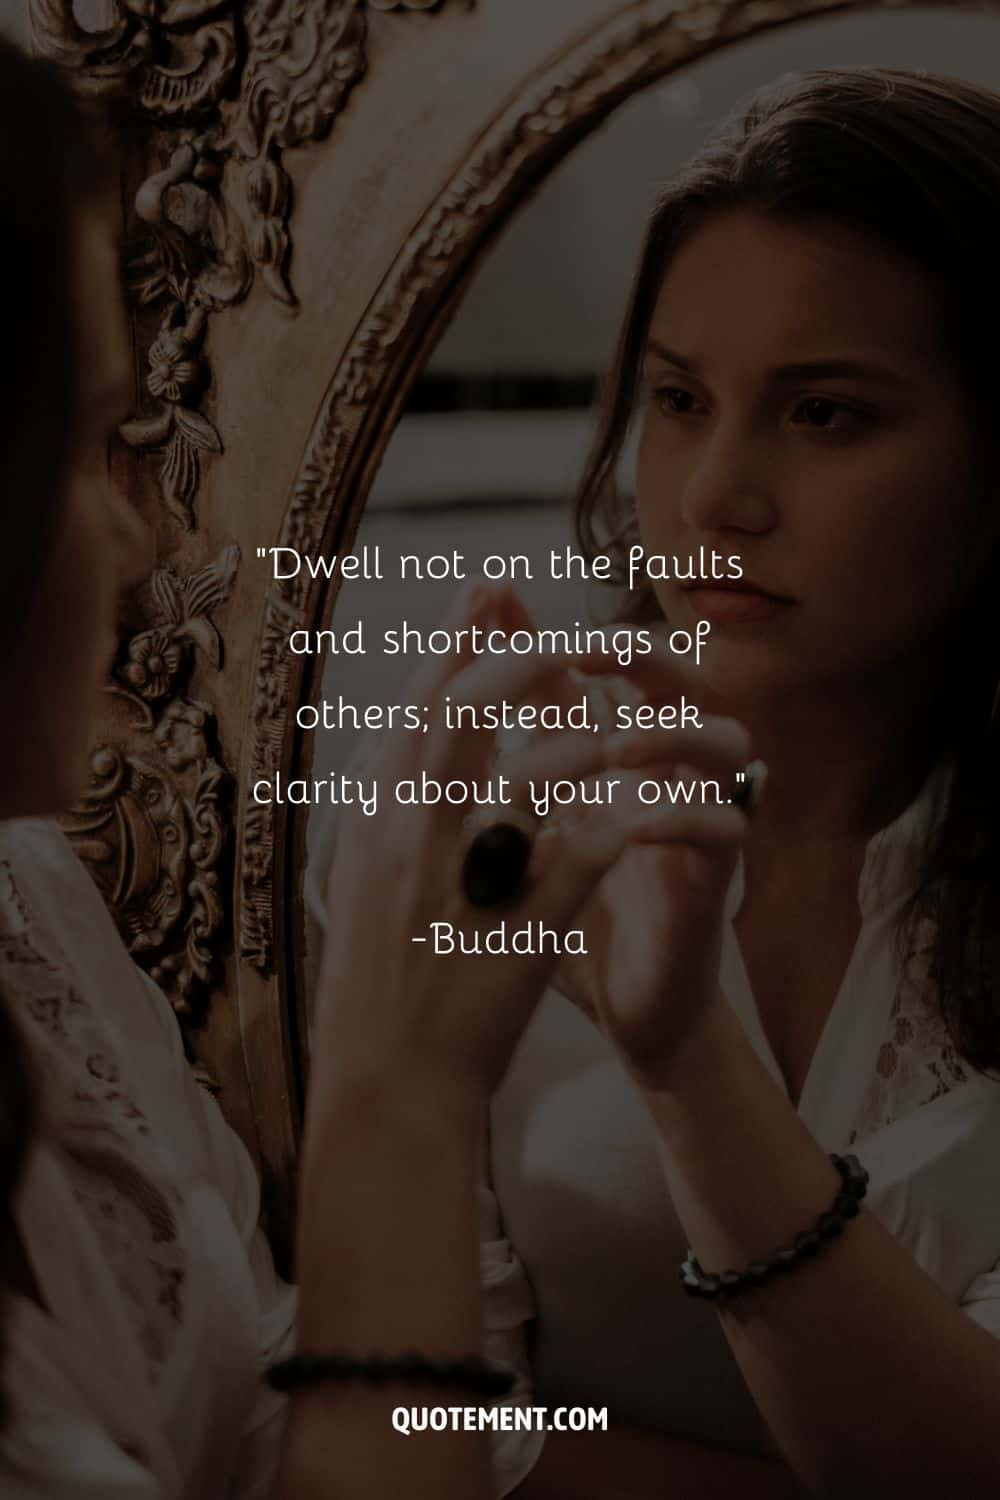 Dwell not on the faults and shortcomings of others; instead, seek clarity about your own. – Buddha